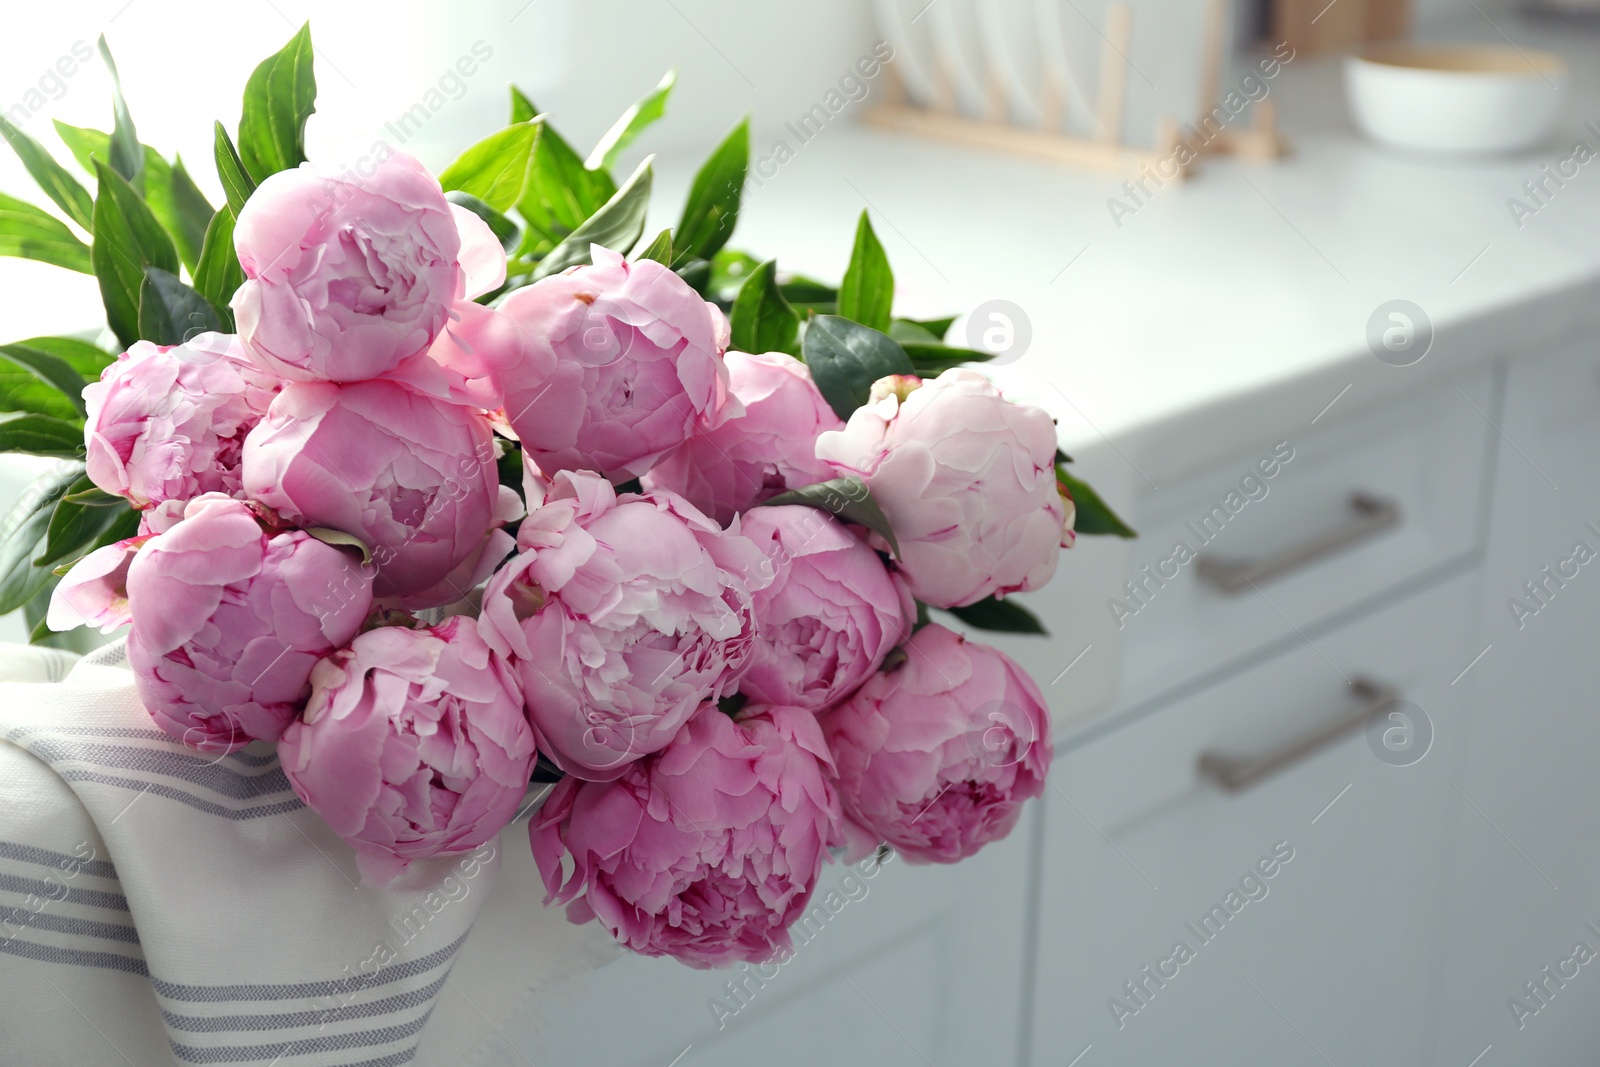 Photo of Bouquet of beautiful pink peonies on counter in kitchen